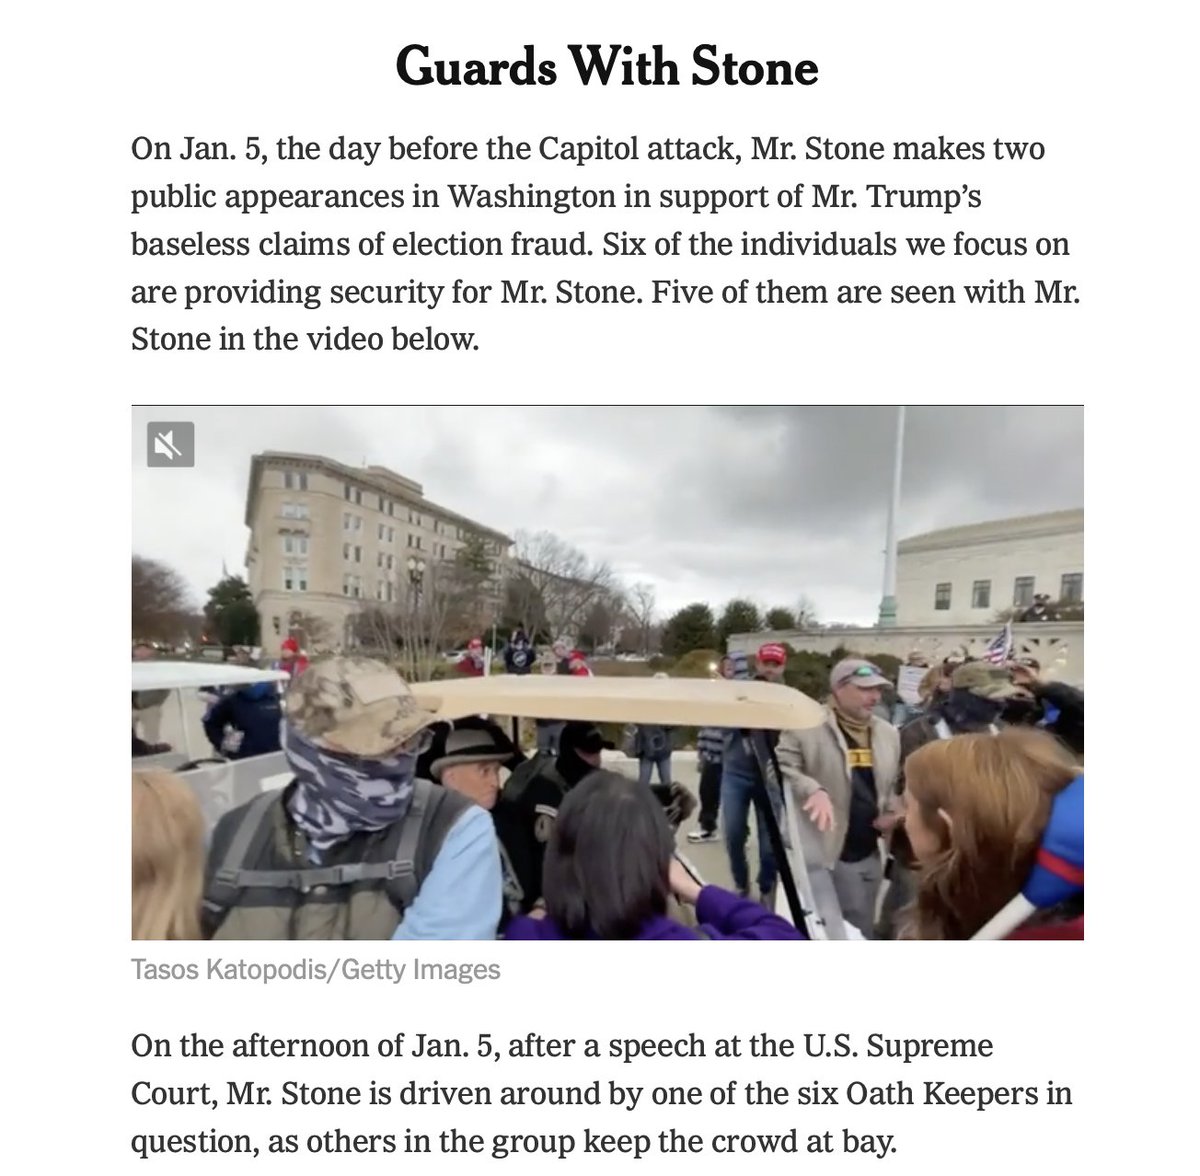 2/ On January 5th, Stone appeared at the Supreme Court, glad-handing and being driven in a go-kart. Later he attended a rally near the White House. As the  @nytimes team shows, his security entourage featured a host of  #OathKeepers...